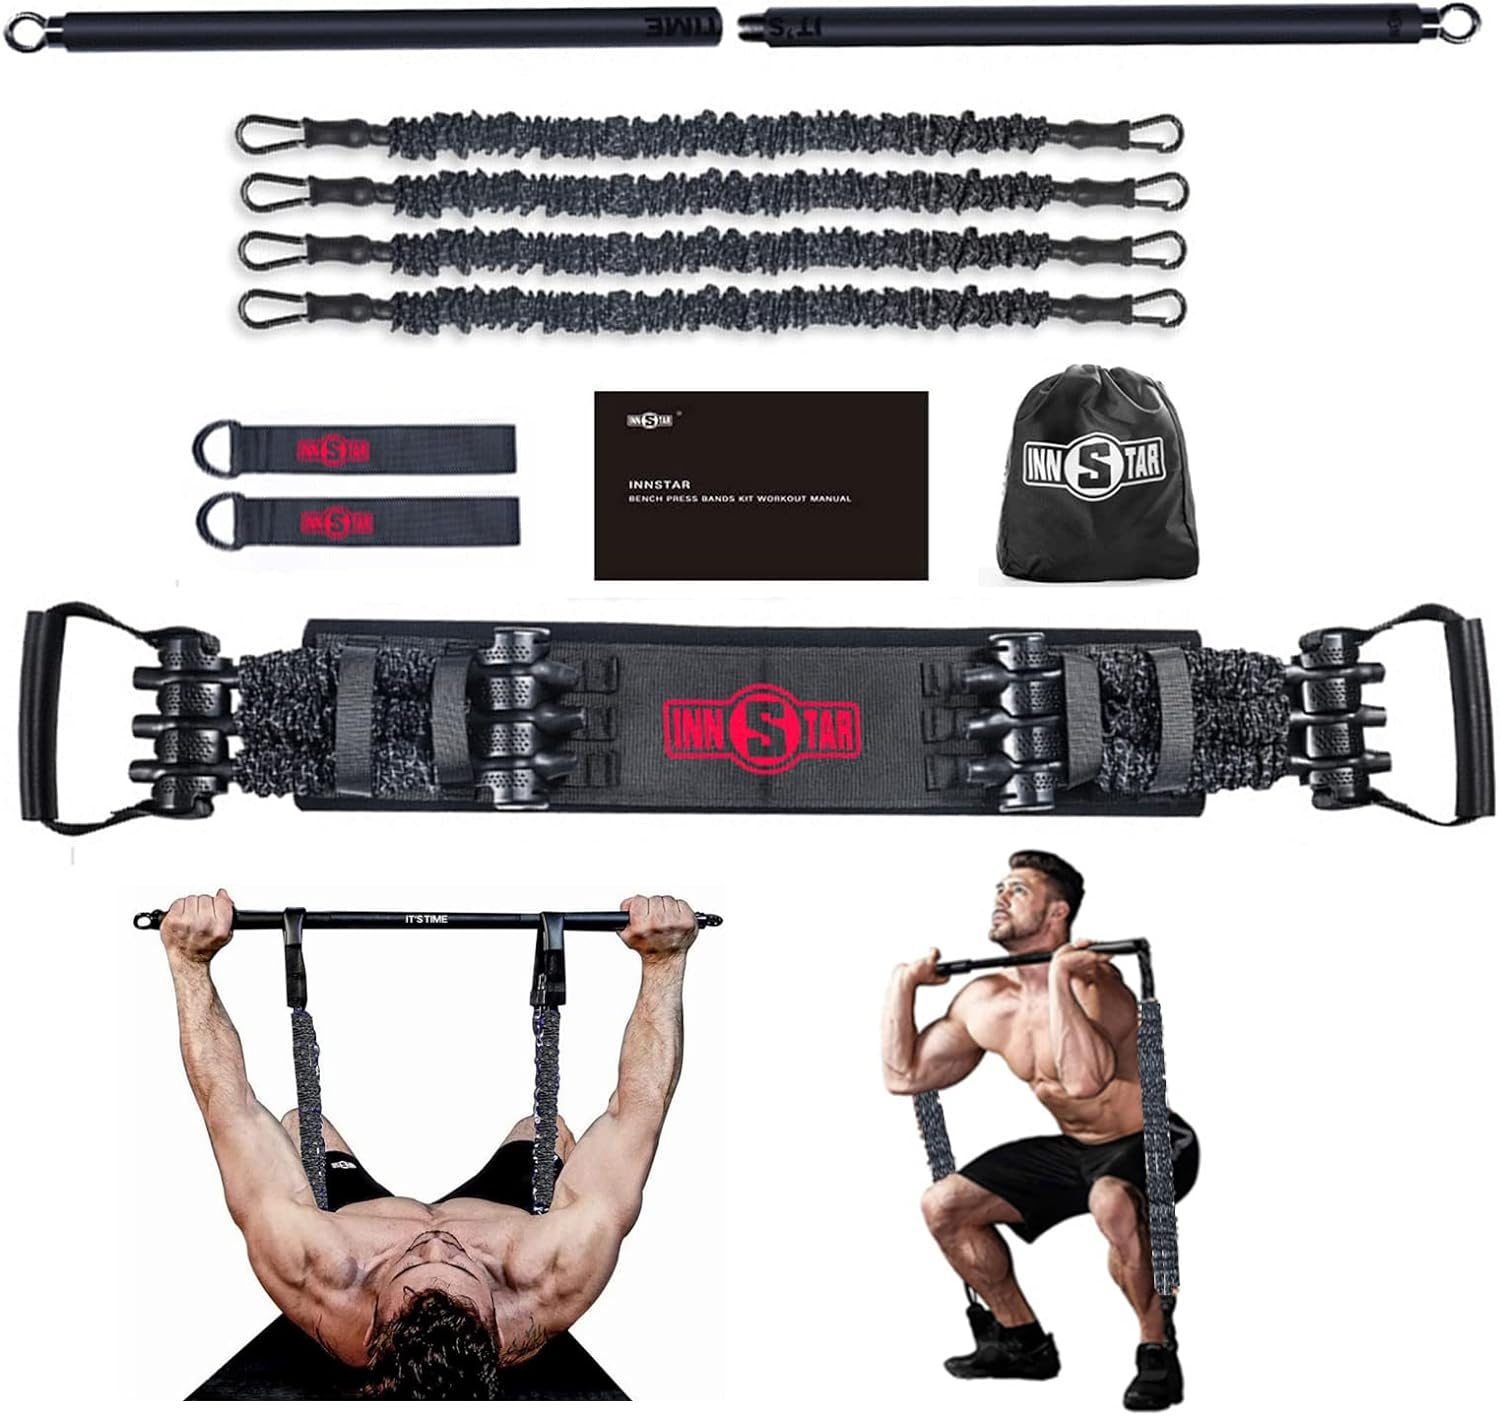 INNSTAR Gym 3.0 Portable Home Gym Training Set, Adjustable Bench Press Squat Resistance Bands with Fitness Bar, Foot Cover, Full Body Workout Fitness Equipment, All in One Gym for Home, Travel